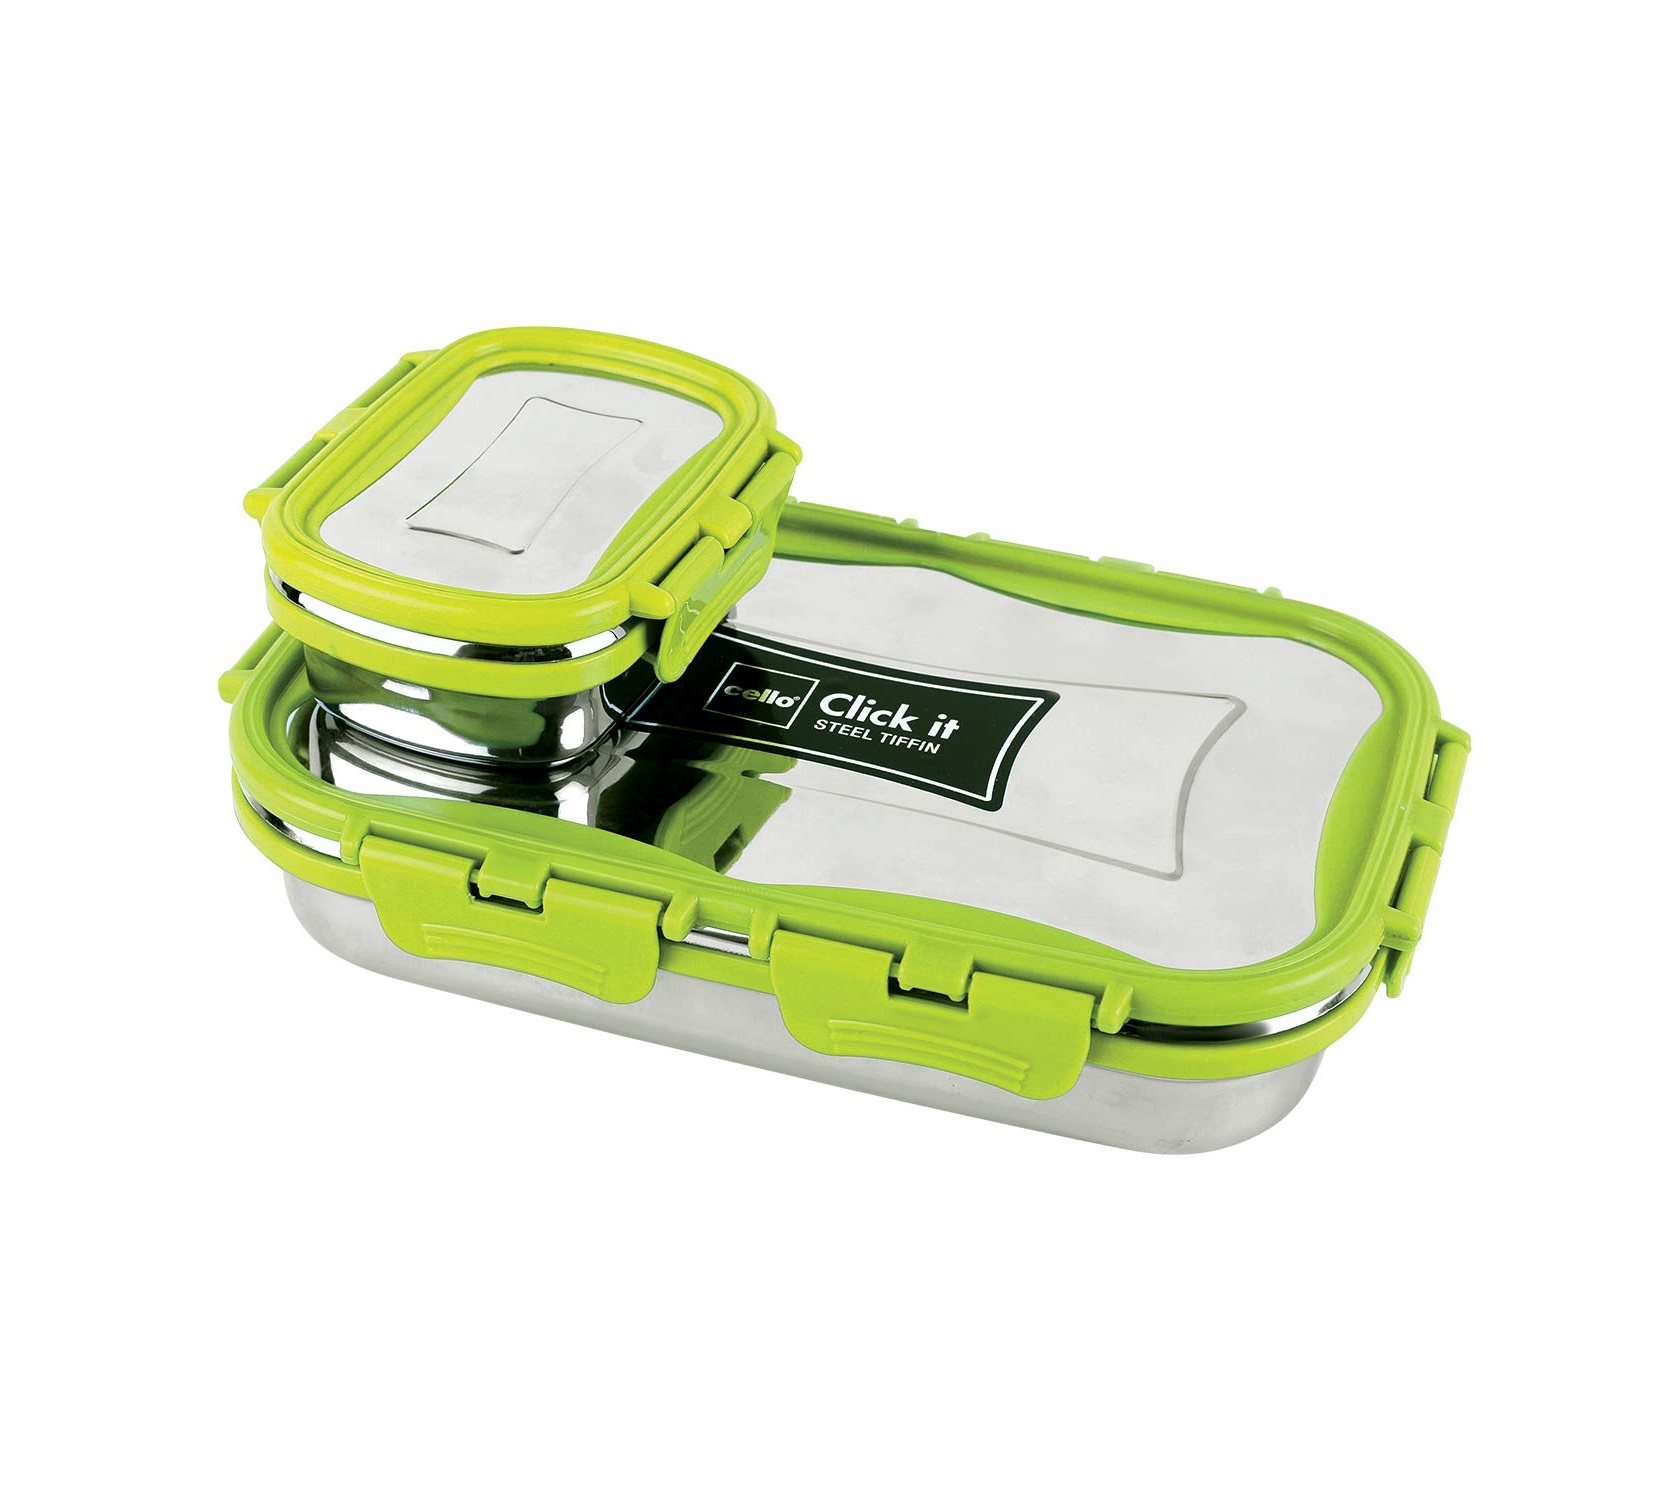 Cello Thermo Click Stainless Steel Lunch Box